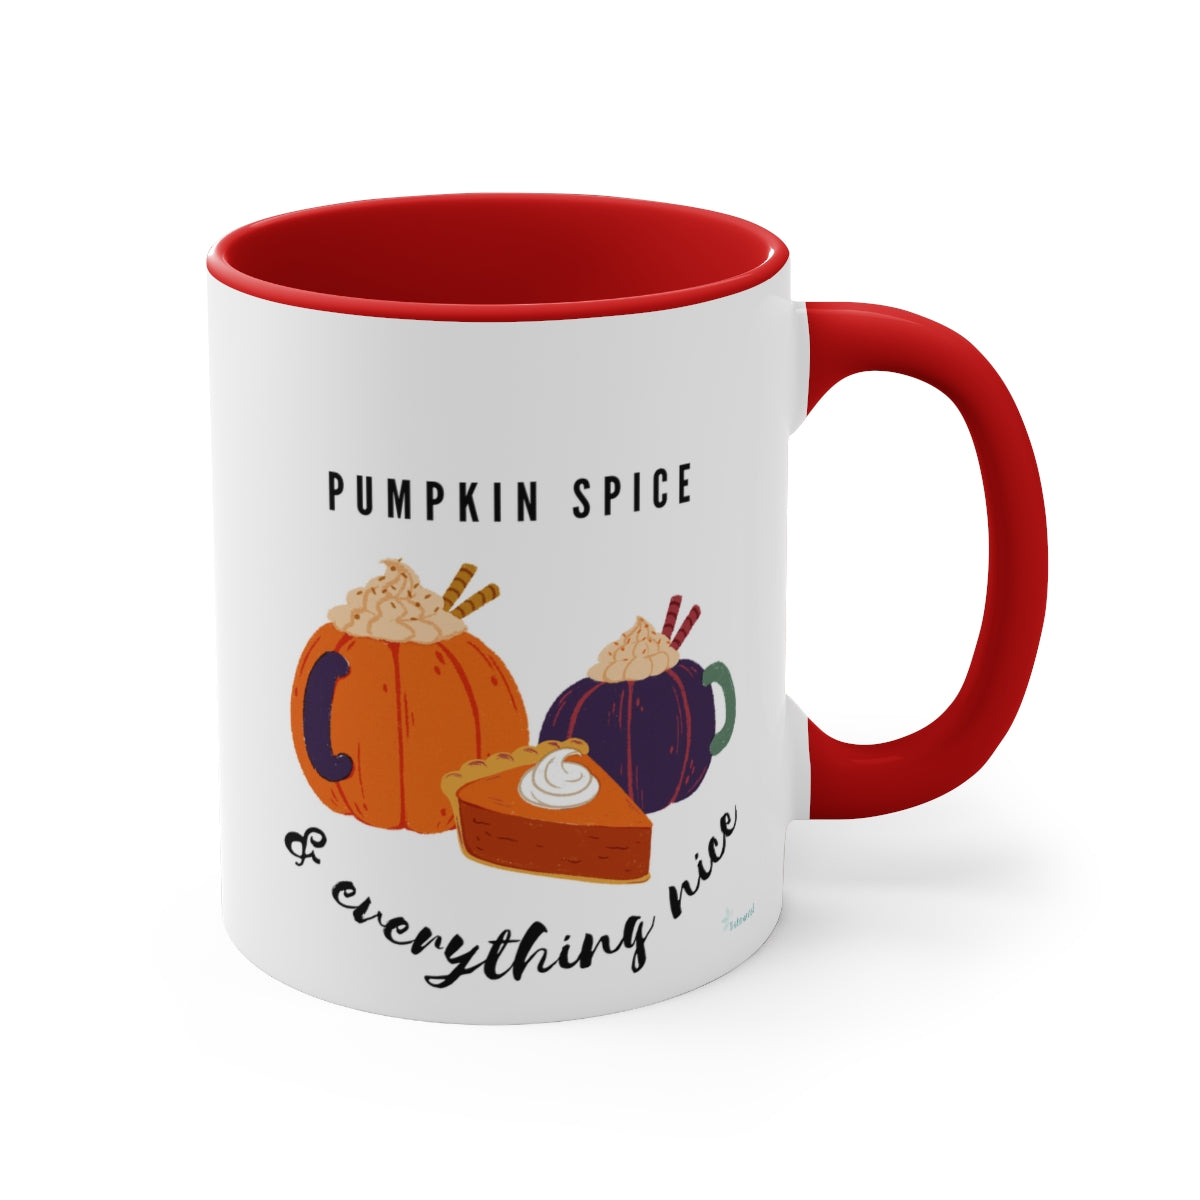 Pumpkin Spice and Everything Nice Colorful Accent Mugs, 11oz